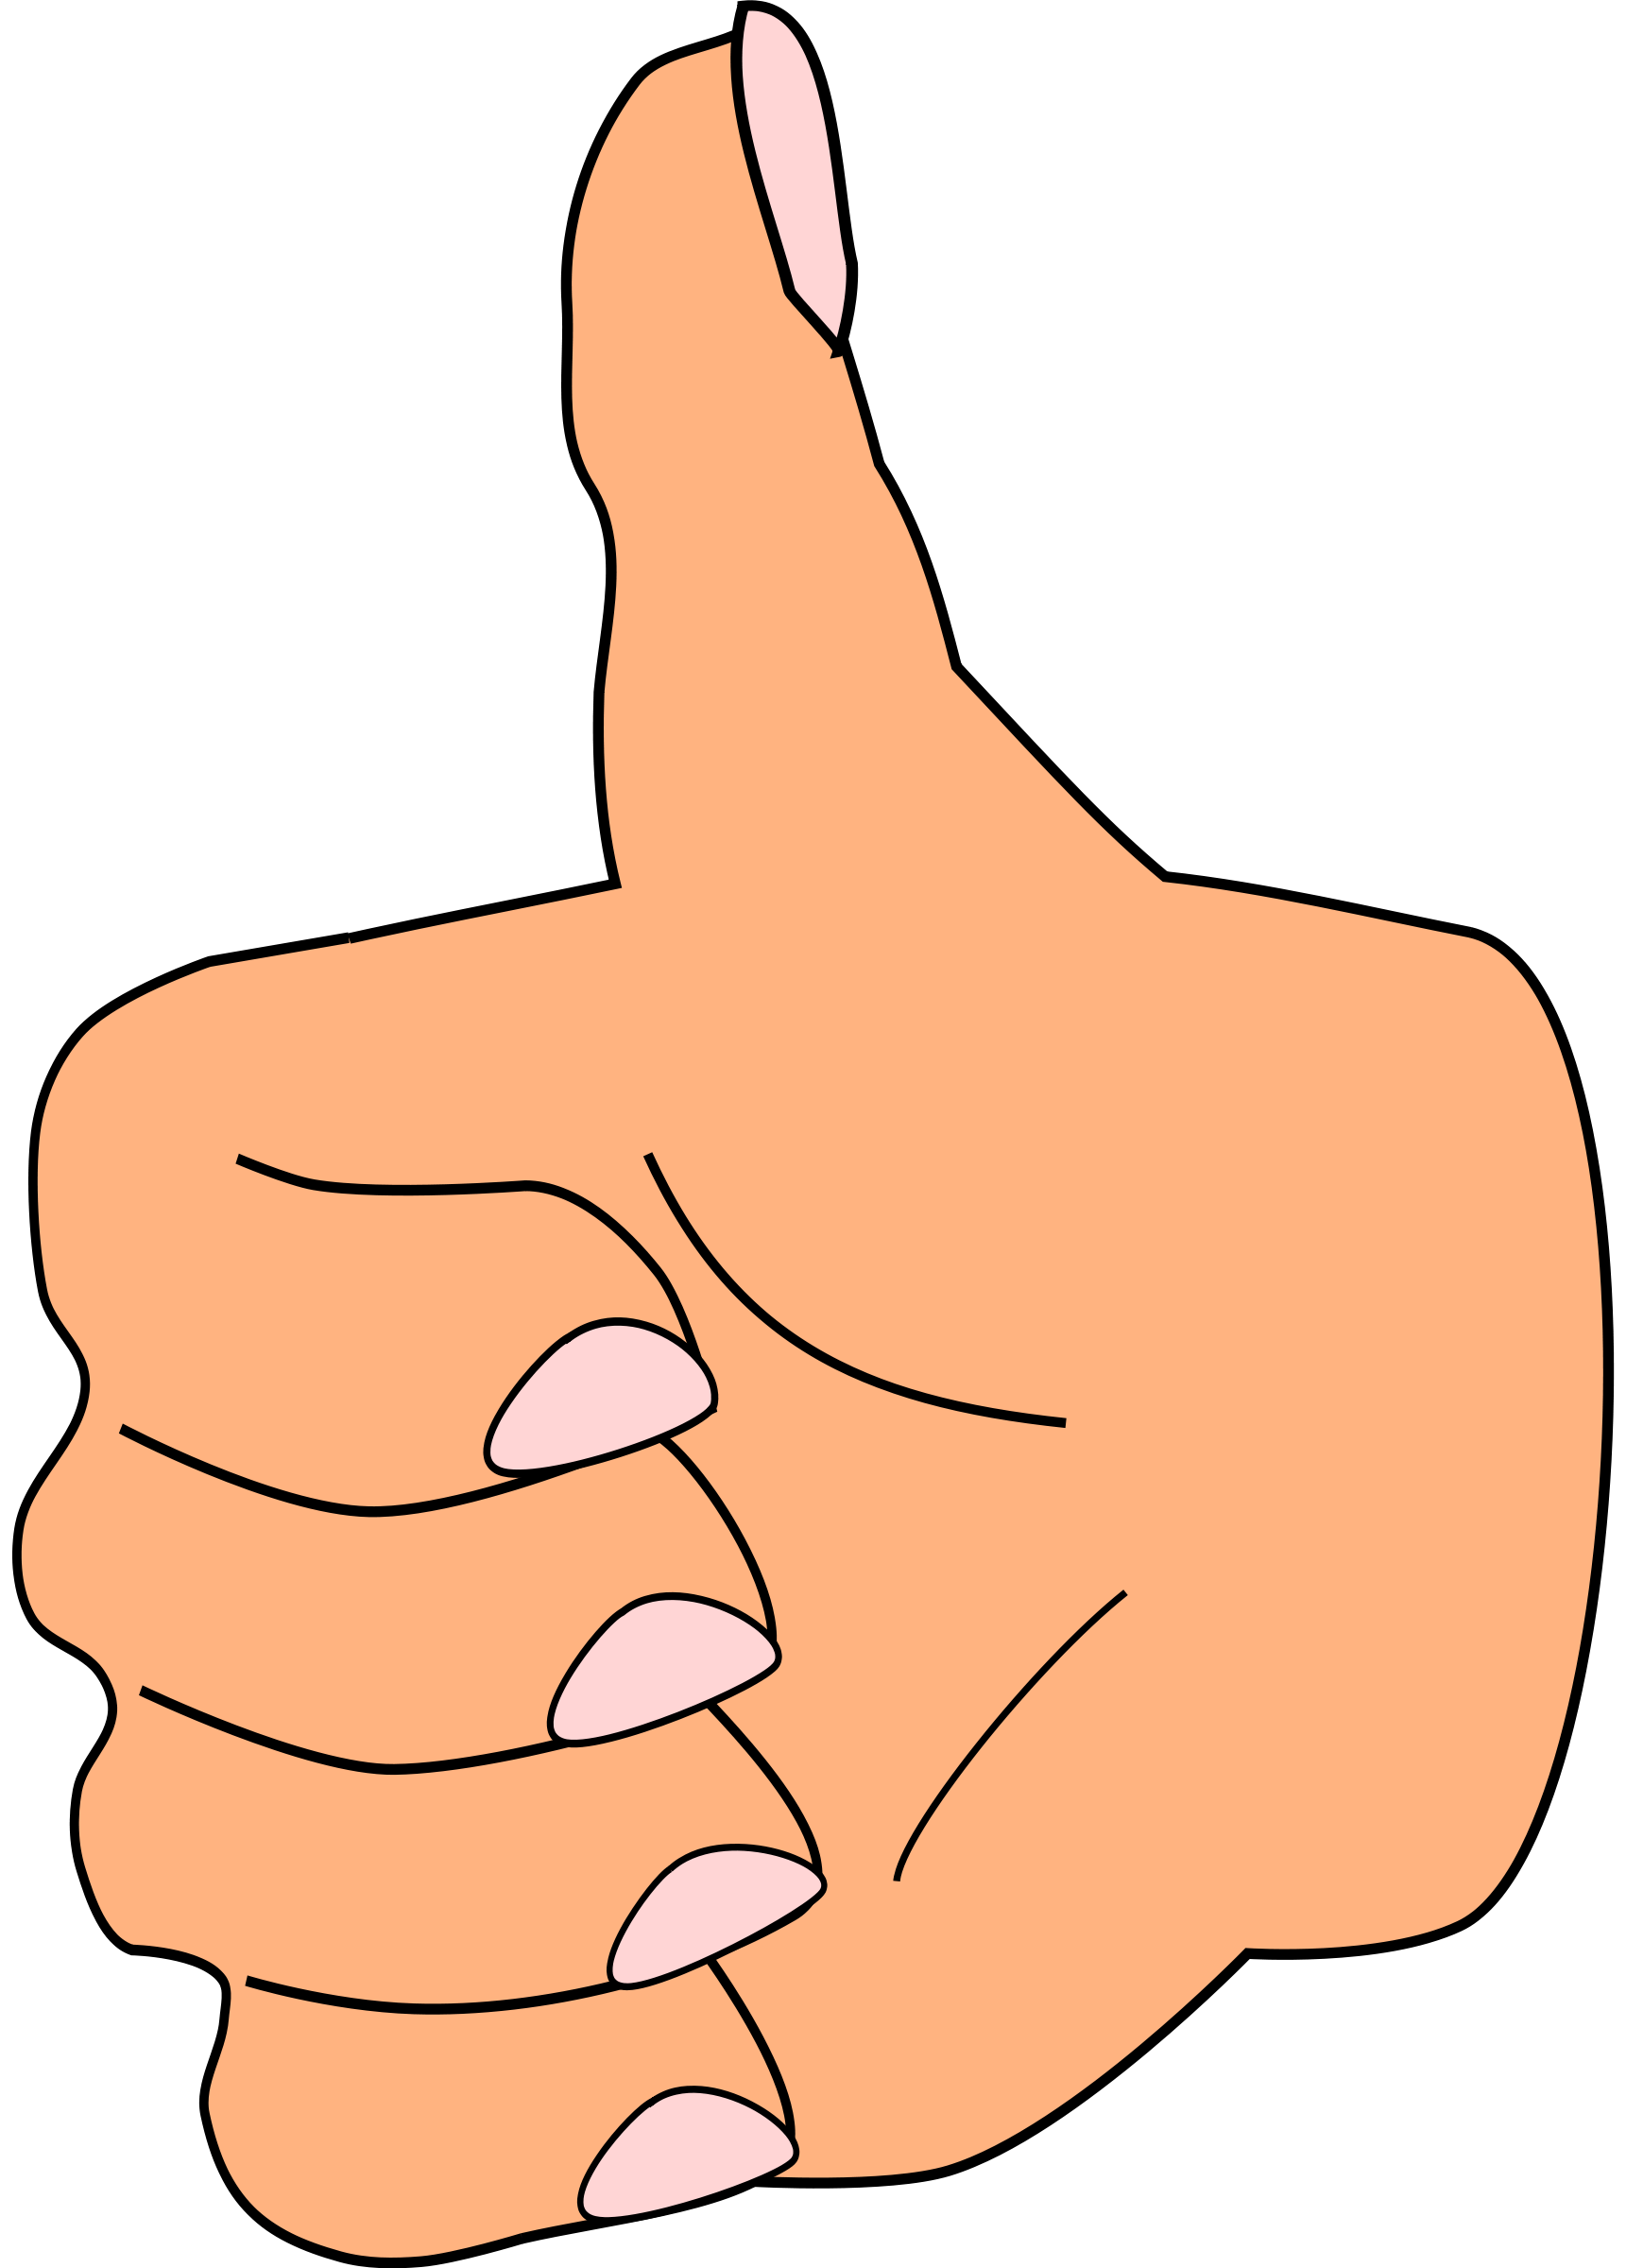 Thumbs Up Thumbs Download Png Clipart